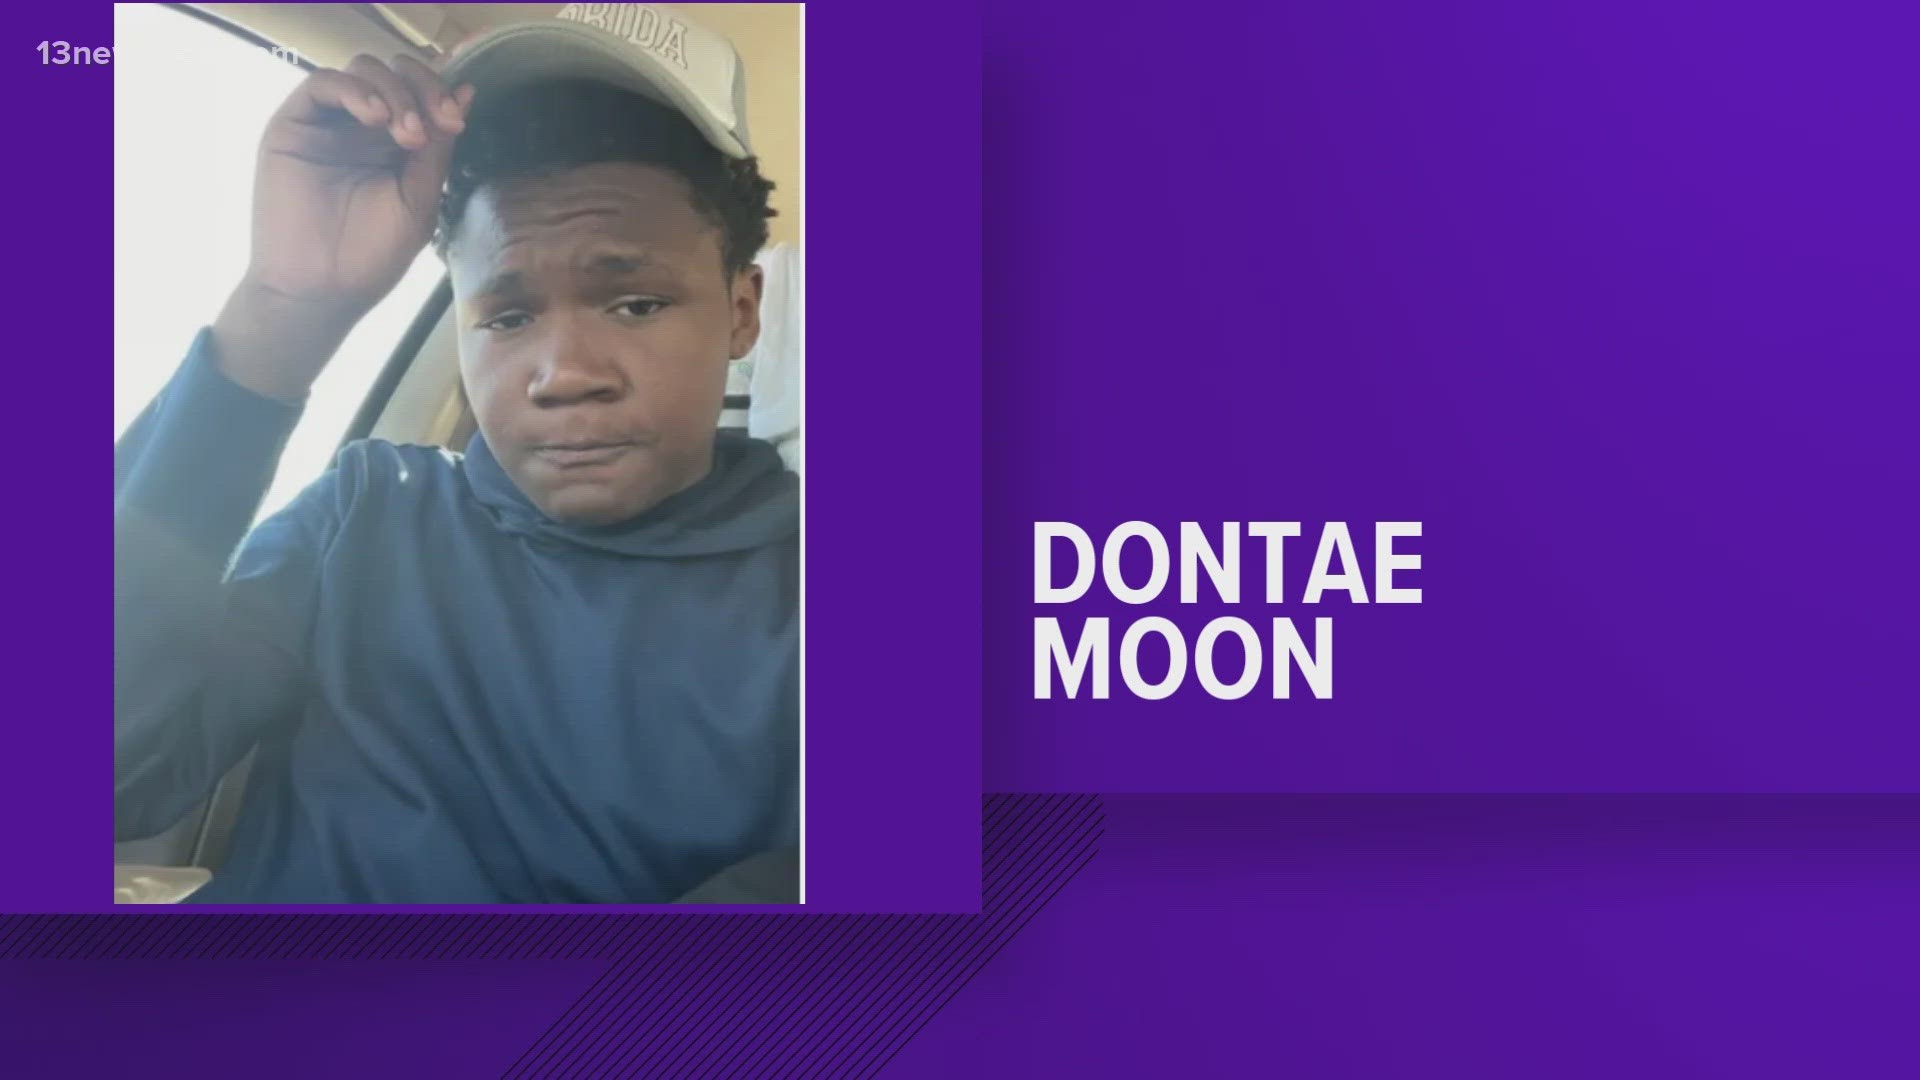 The Portsmouth Police Department said 14-year-old Dontae Moon was last seen on May 29 near the 3900 block of Twin Pines Road in Churchland.